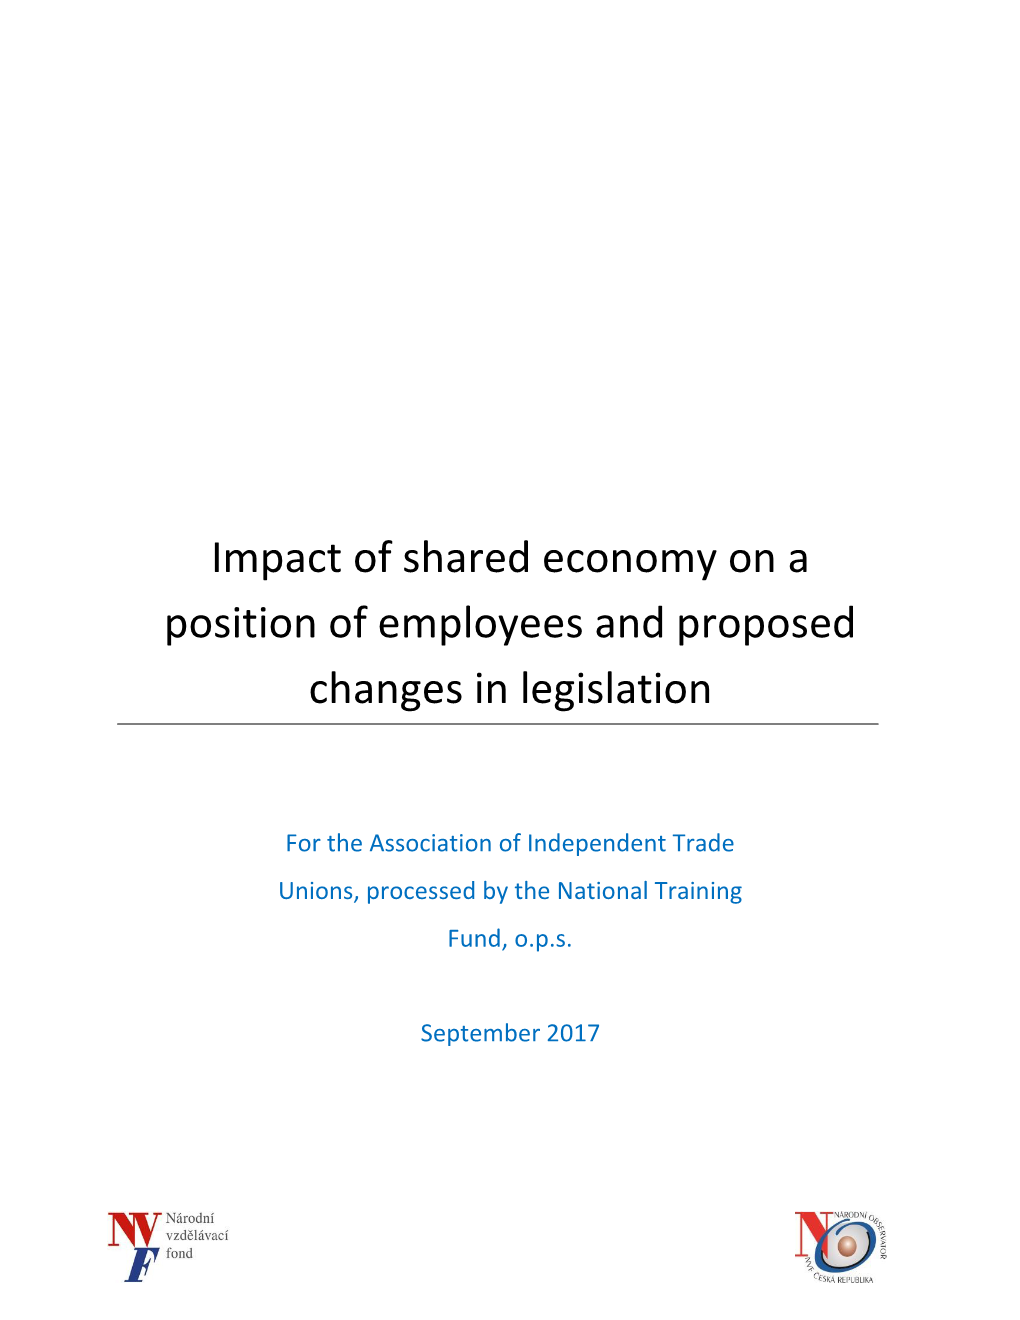 Impact of Shared Economy on a Position of Employees and Proposed Changes in Legislation